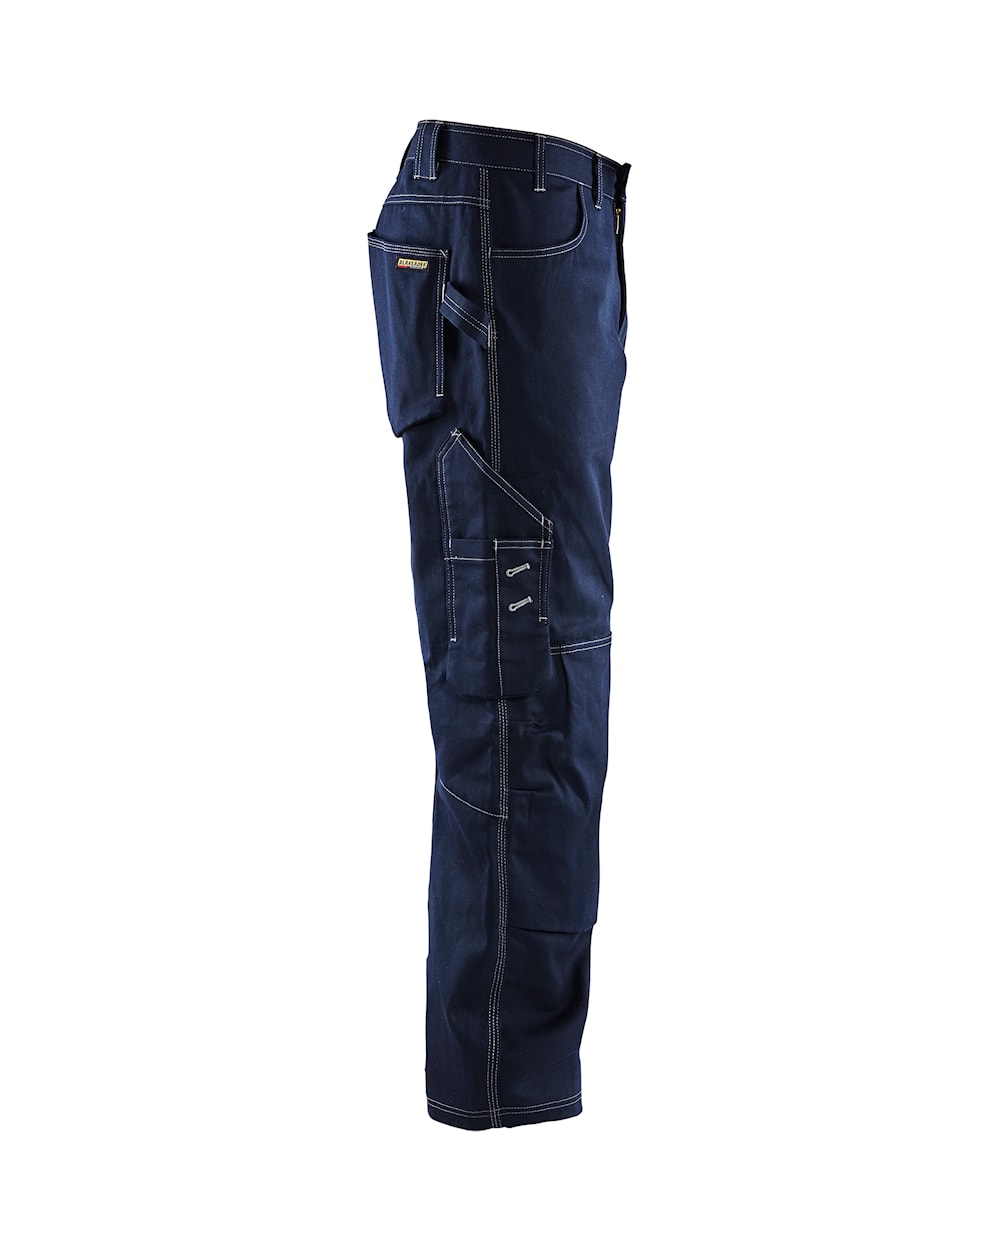 Blaklader 1676 Fire Resistant Pants from GME Supply